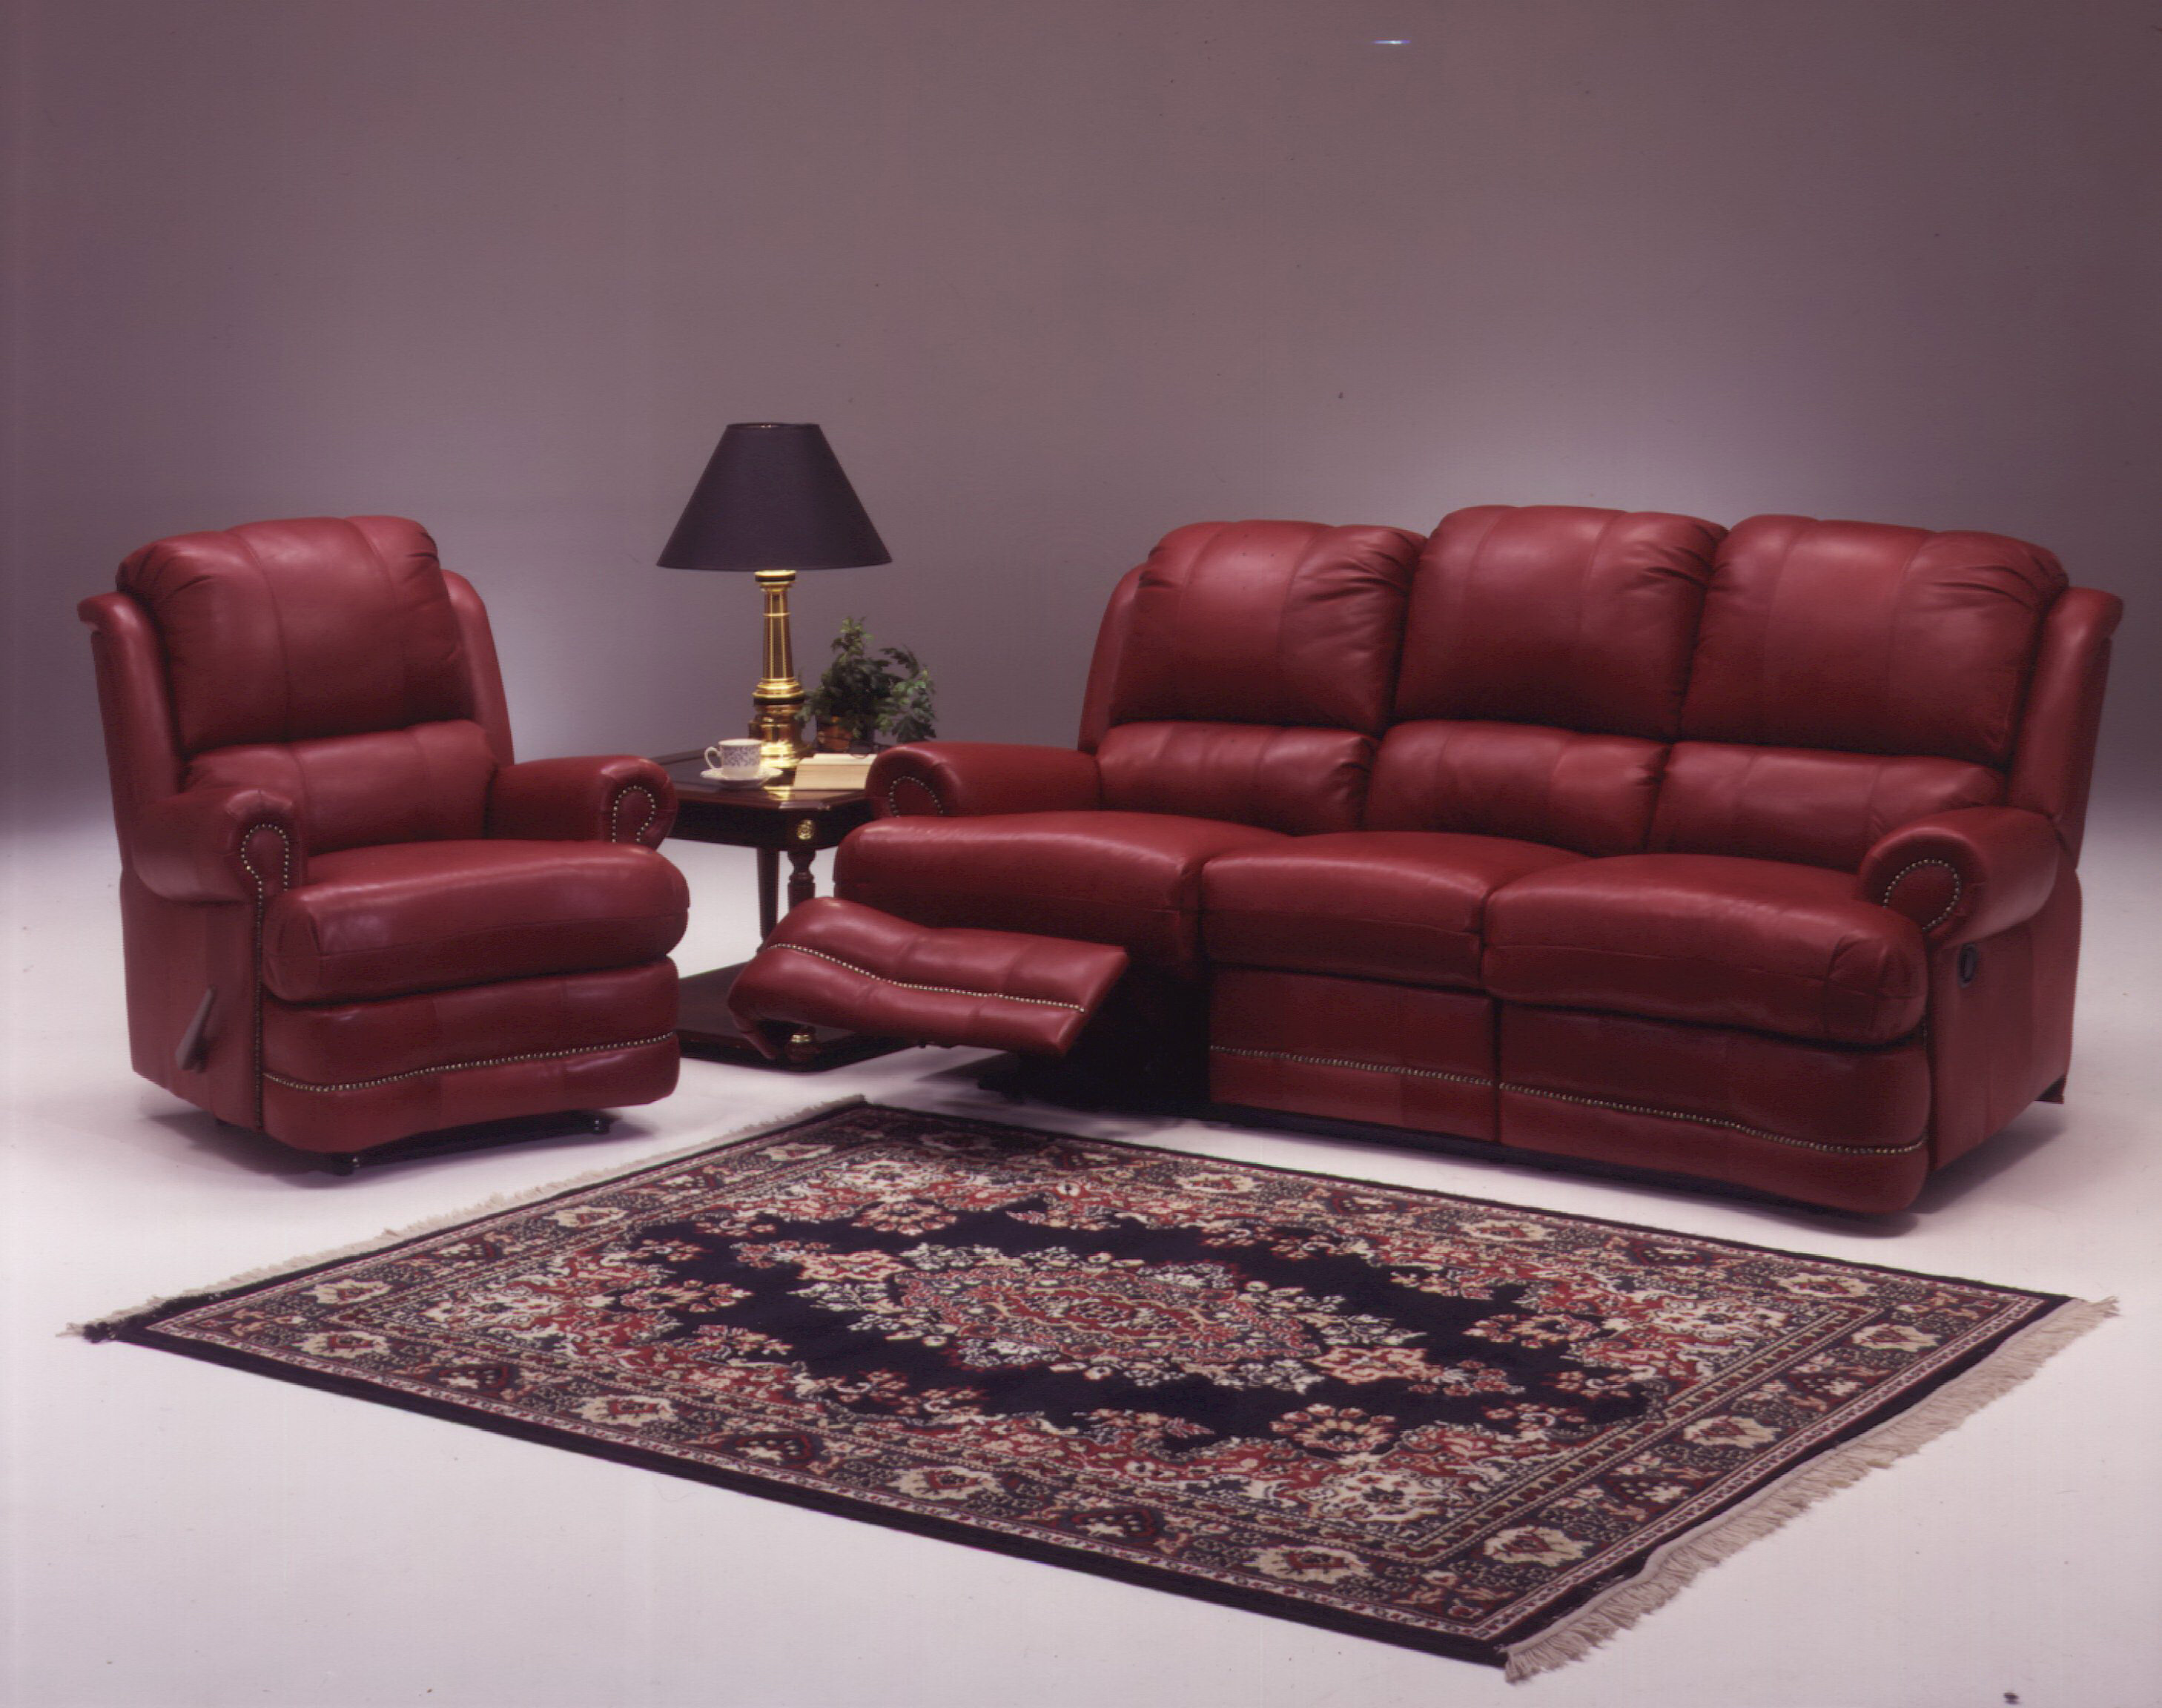 Omnia Leather Morgan Reclining Leather Configurable Living Room Set Reviews Wayfair